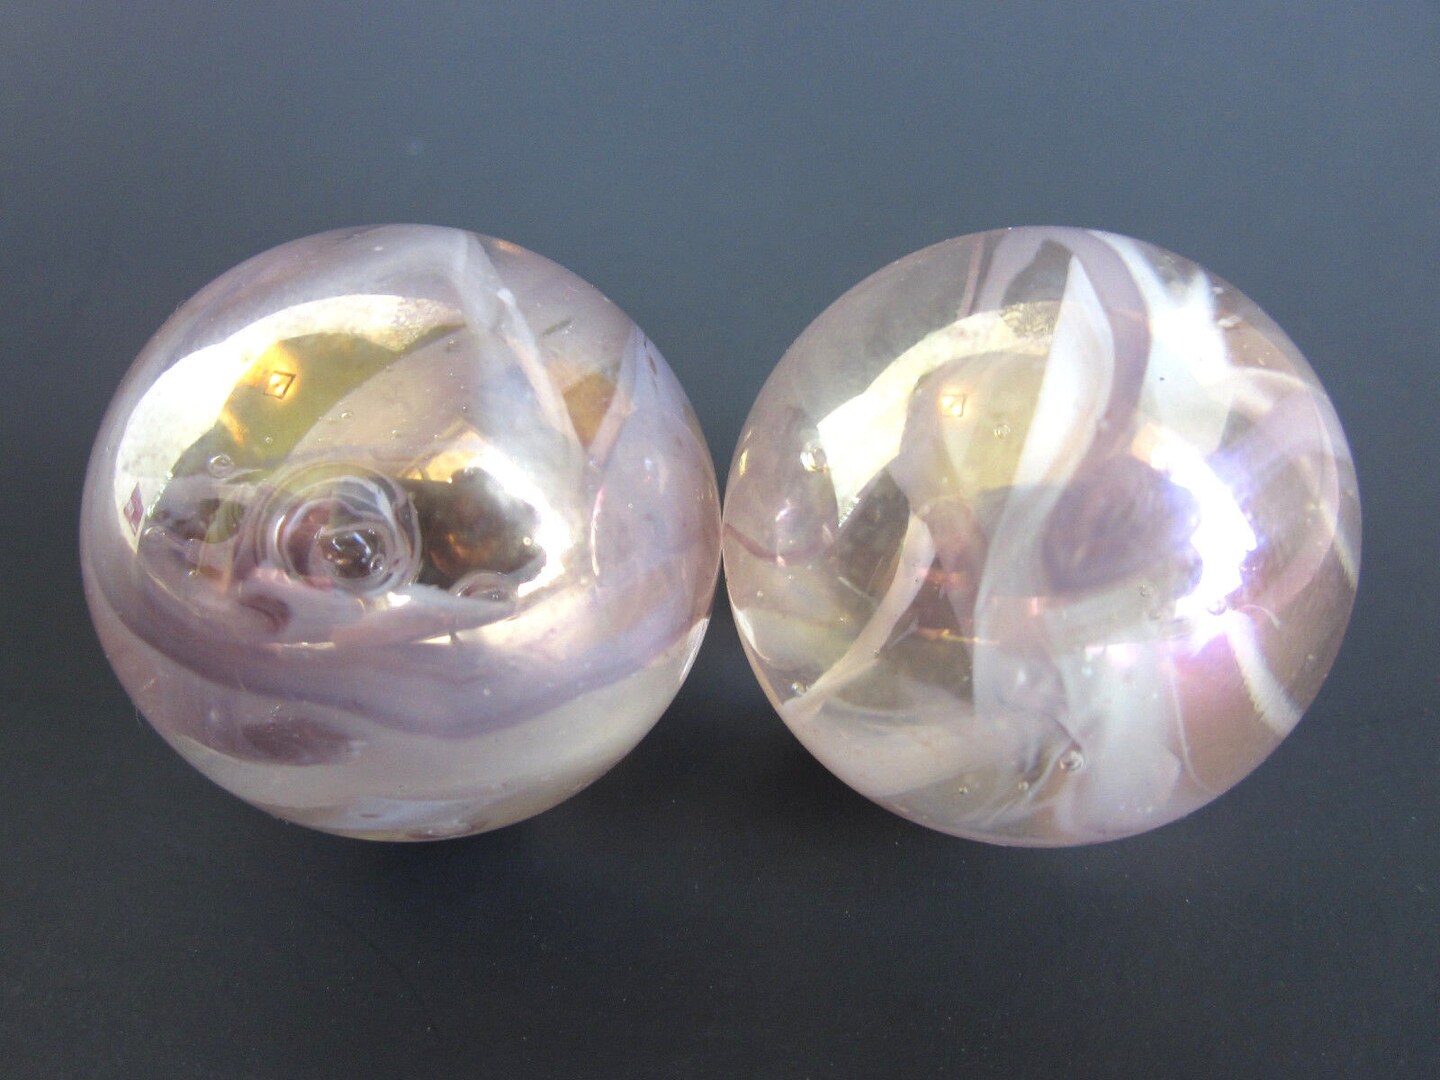 2 Boulders35mm PINK FAIRY Marbles glass ball jellyfish iridescent Giant